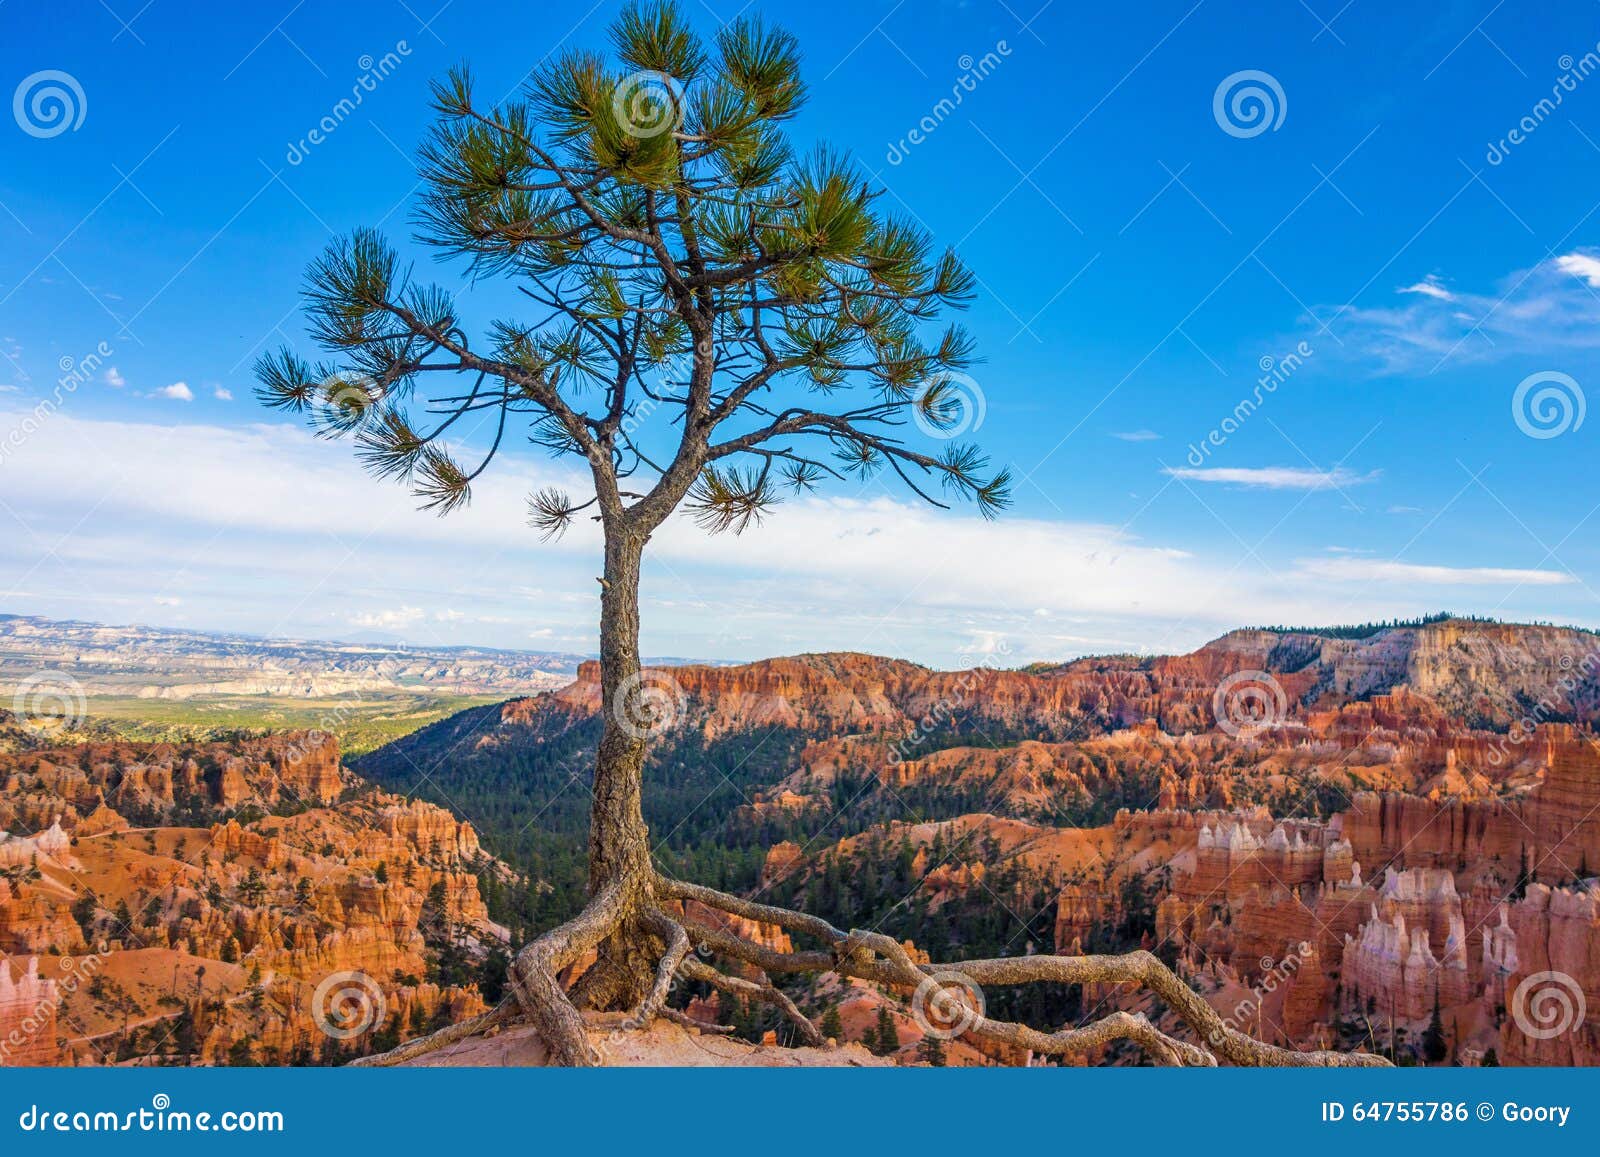 solitary tree in bryce canyon national park, utah